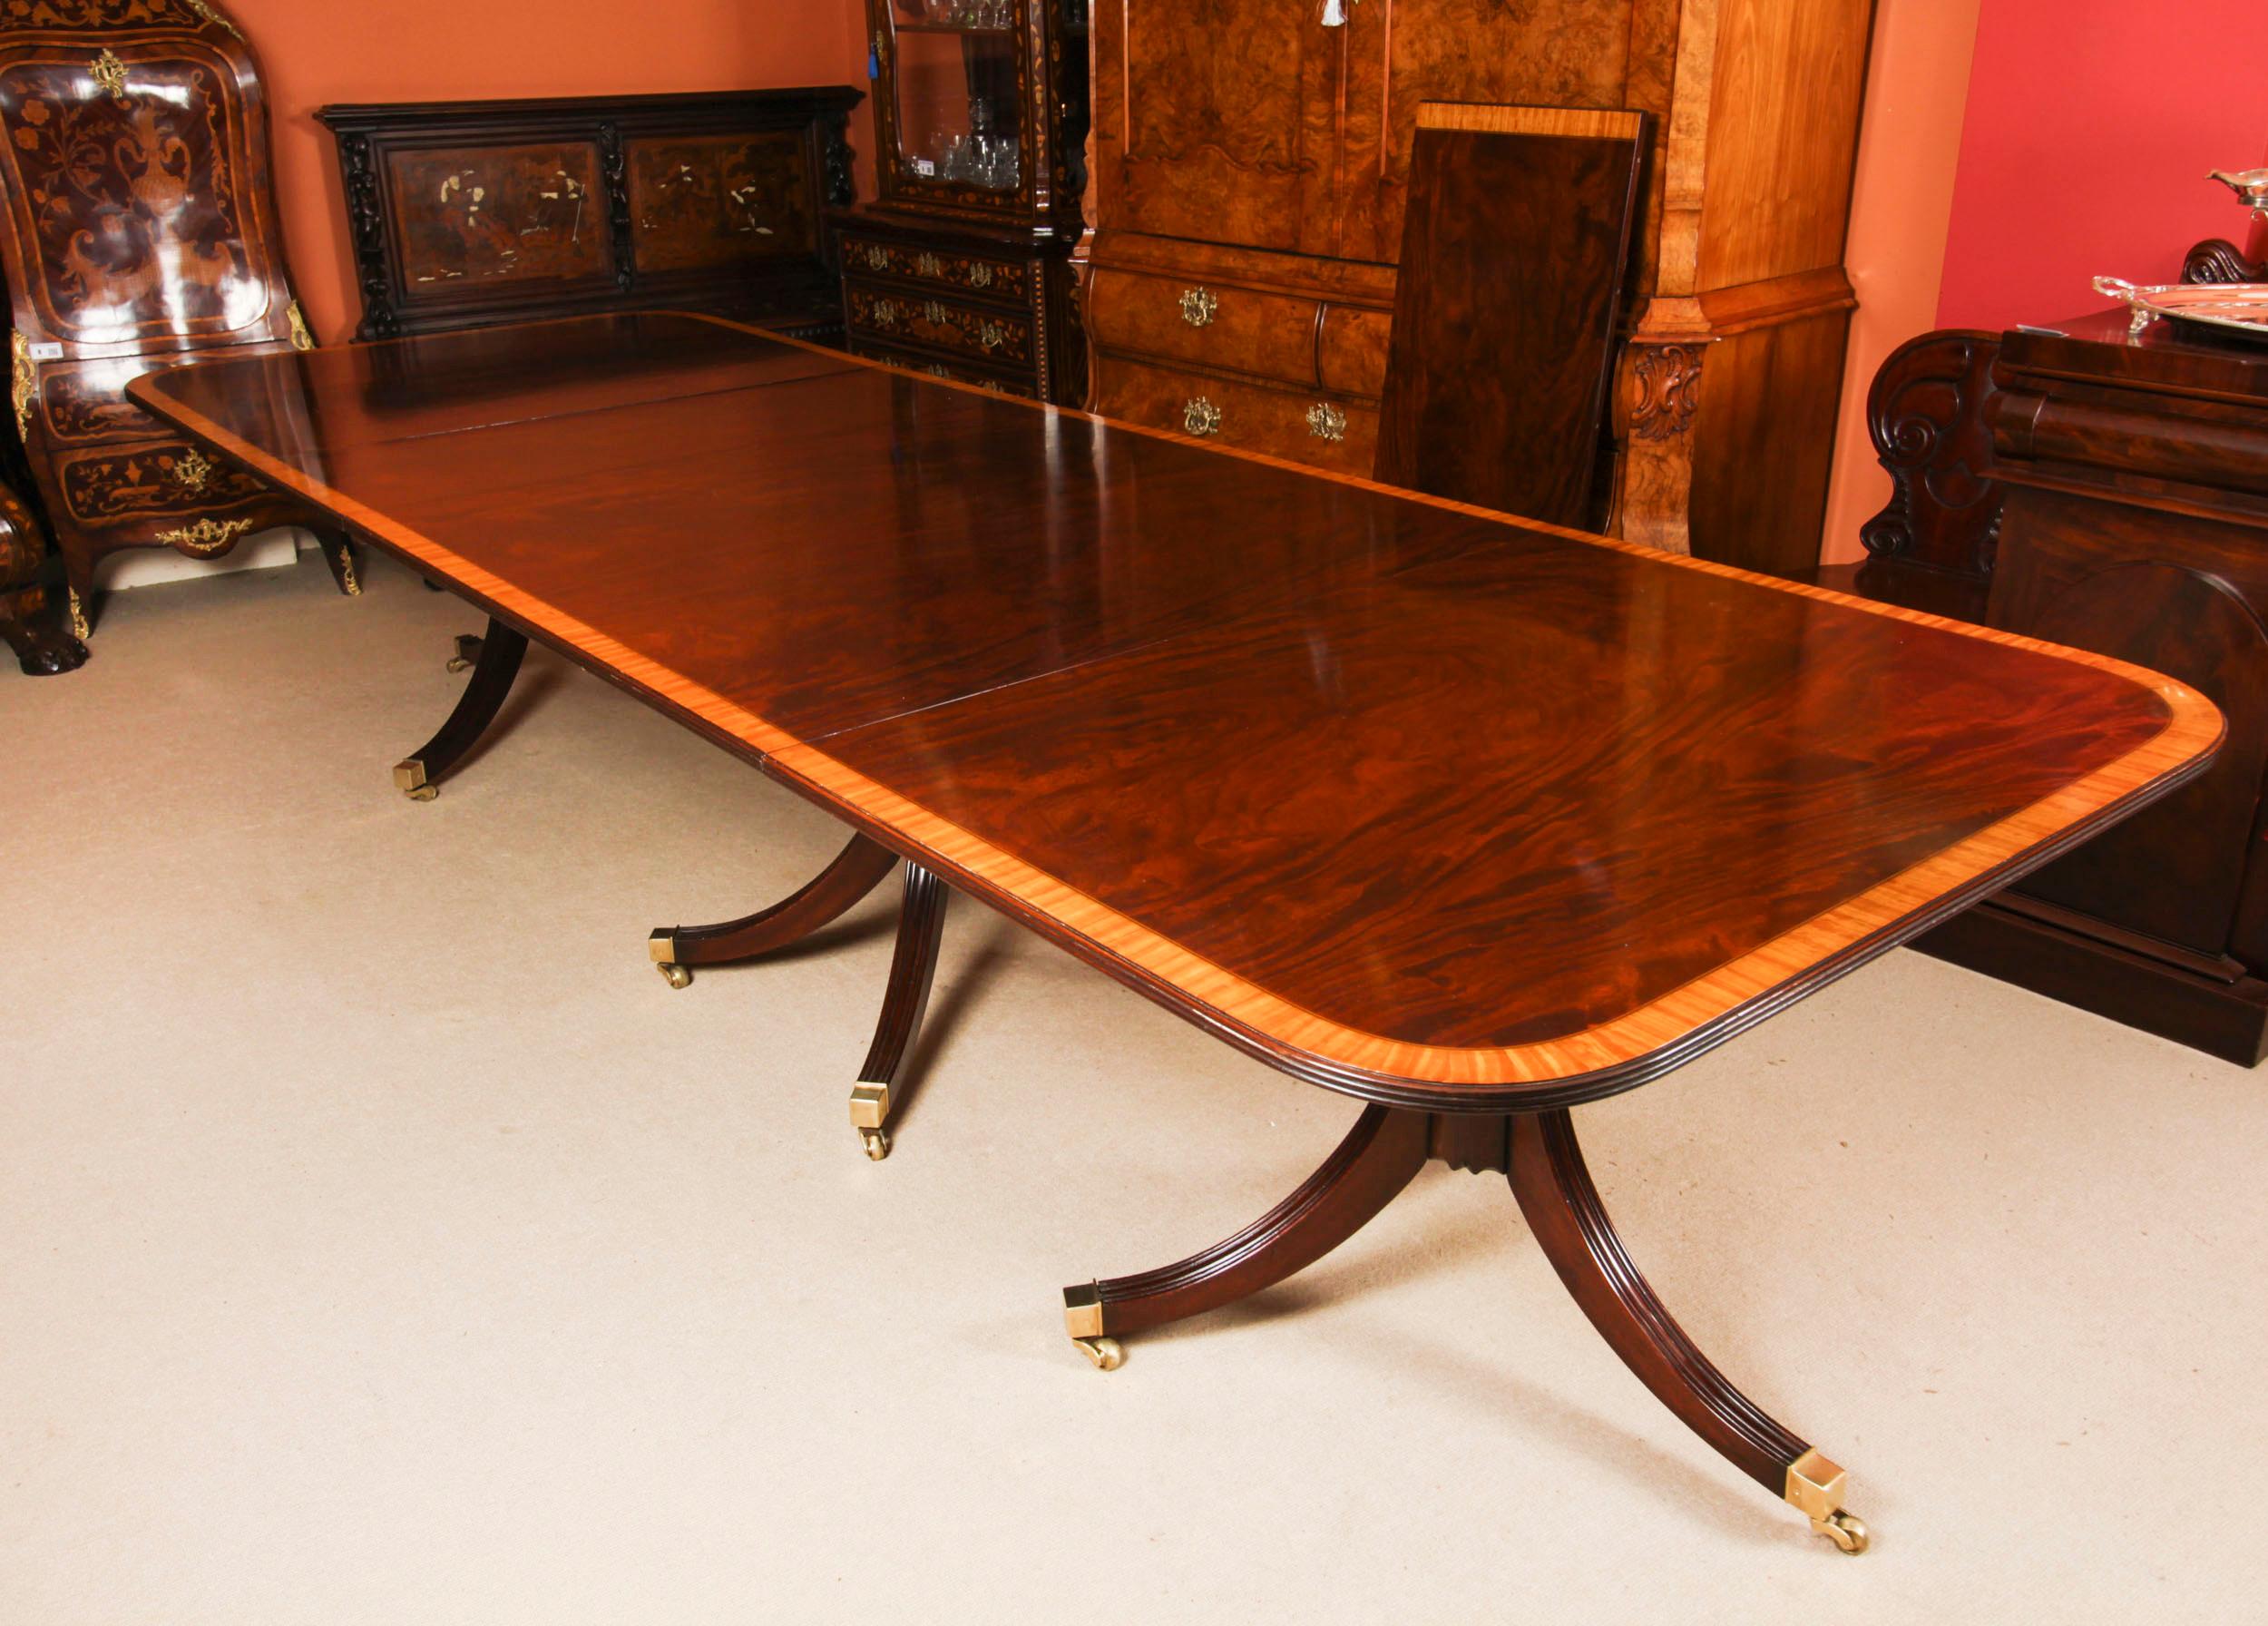 English Vintage 13ft Three Pillar Mahogany Dining Table with 14 Chairs 20th C For Sale